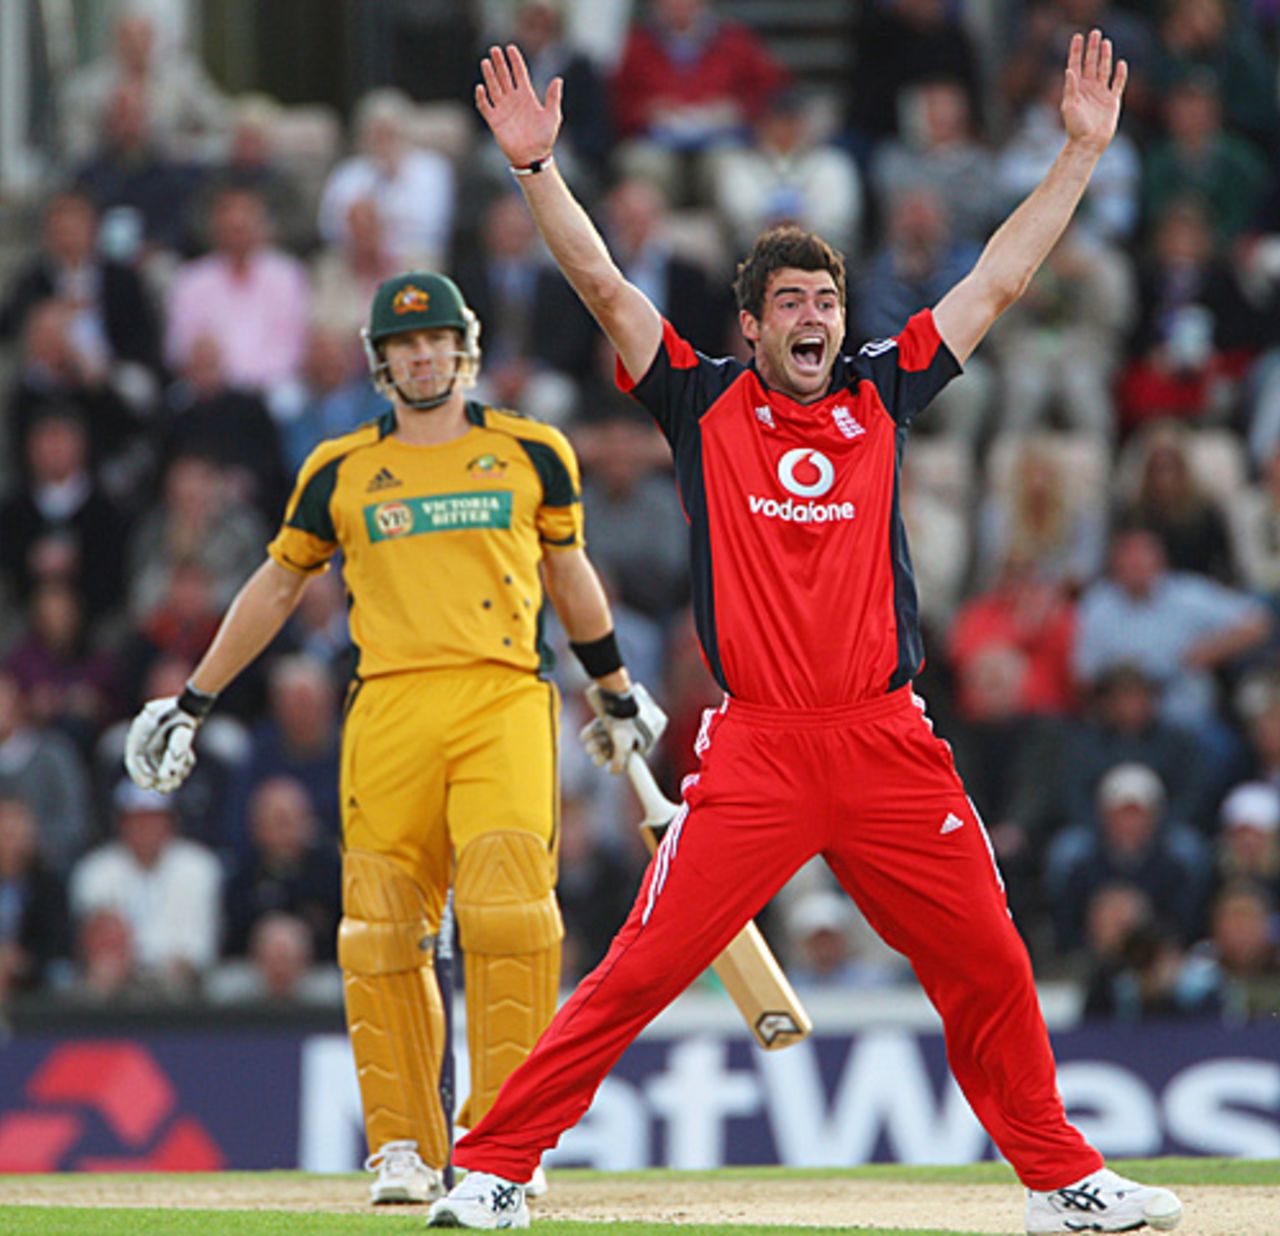 James Anderson successfully appeals for the wicket of Shane Watson, England v Australia, 3rd ODI, Southampton, September 9, 2009